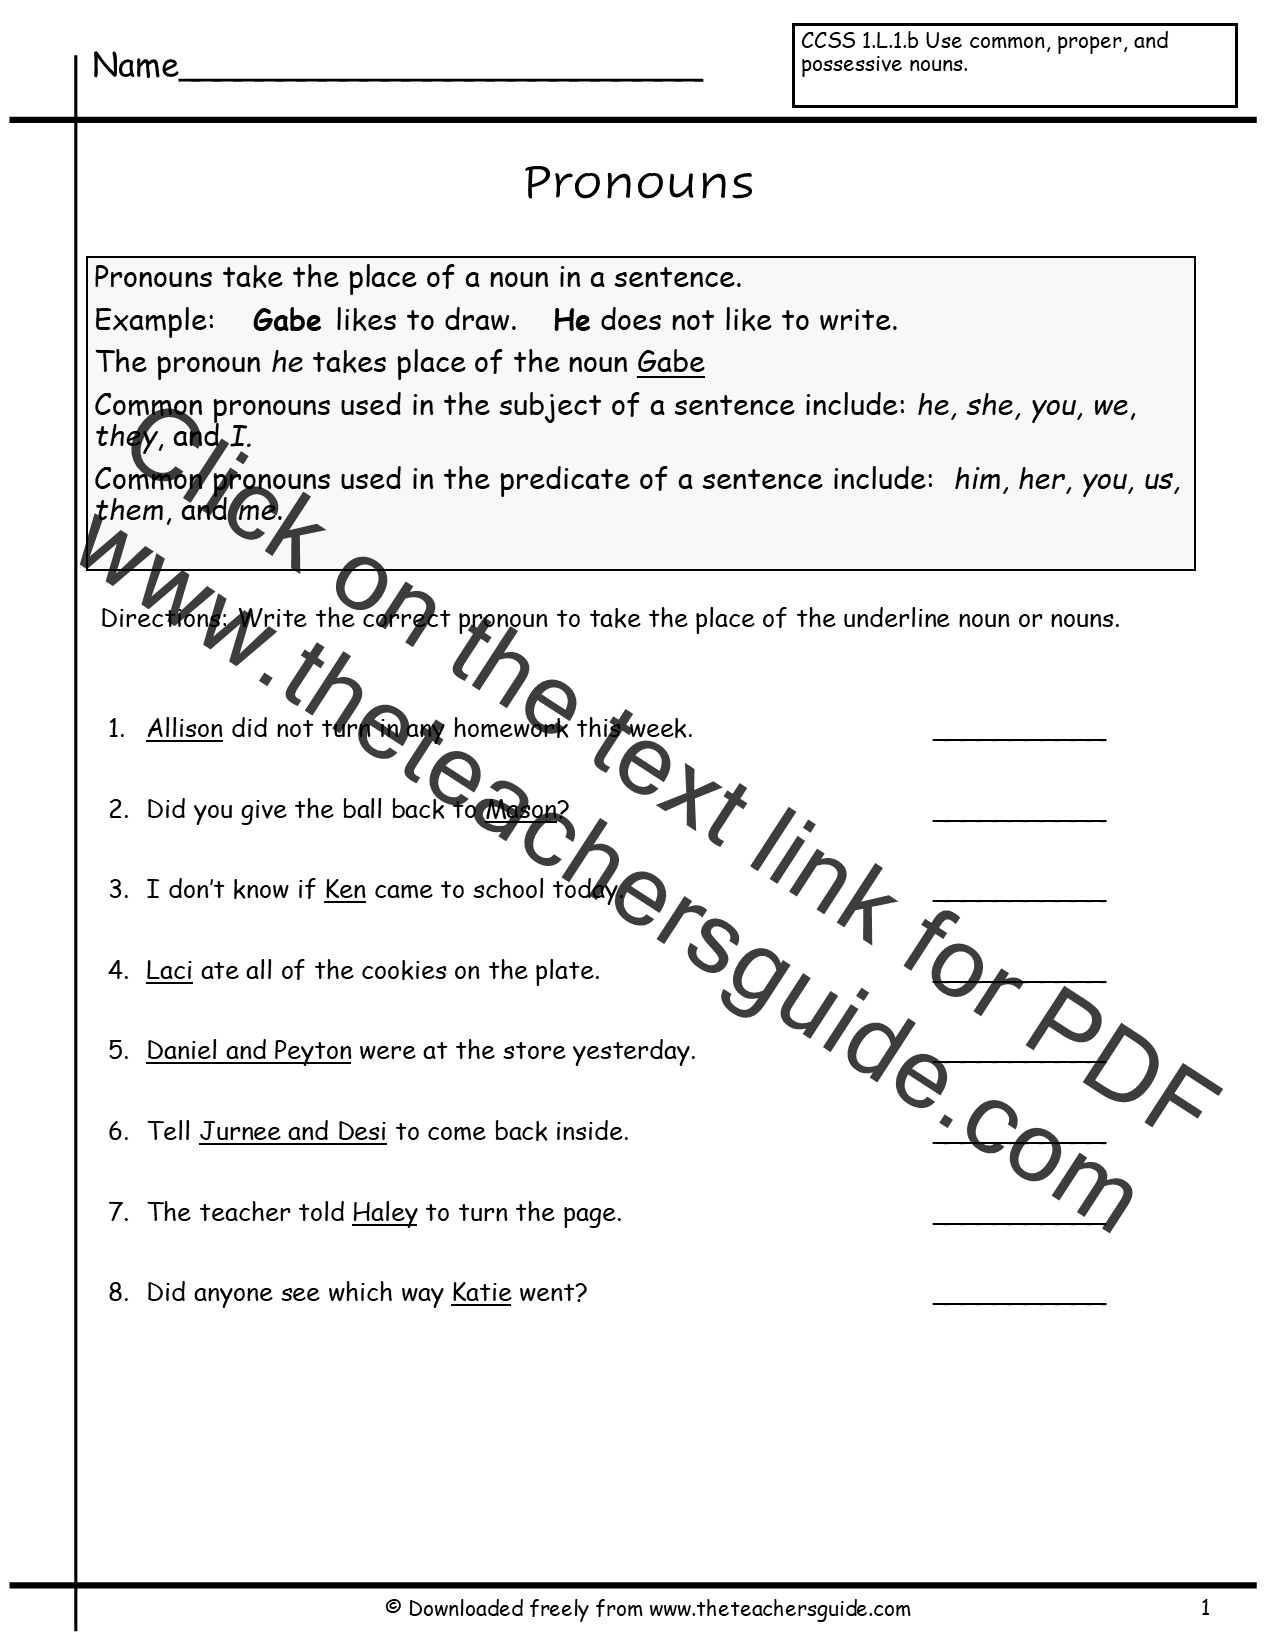 pronouns-nouns-worksheets-from-the-teacher-s-guide